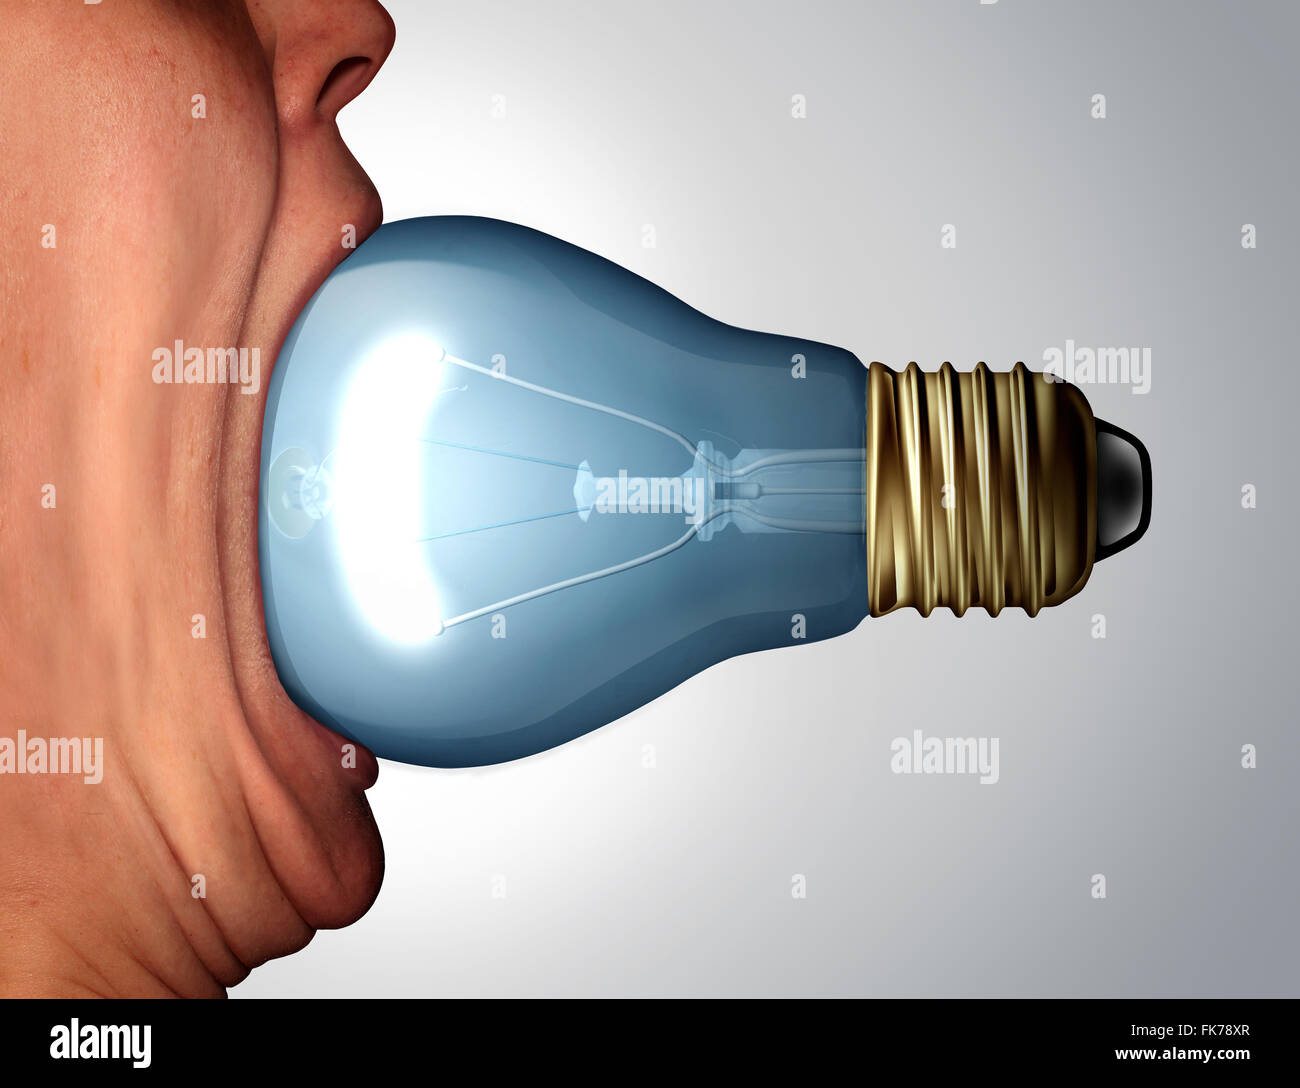 Creative diet concept as a an open huge human mouth eating a light bulb or lightbulb object as a business communication icon and marketing creativity symbol. Stock Photo